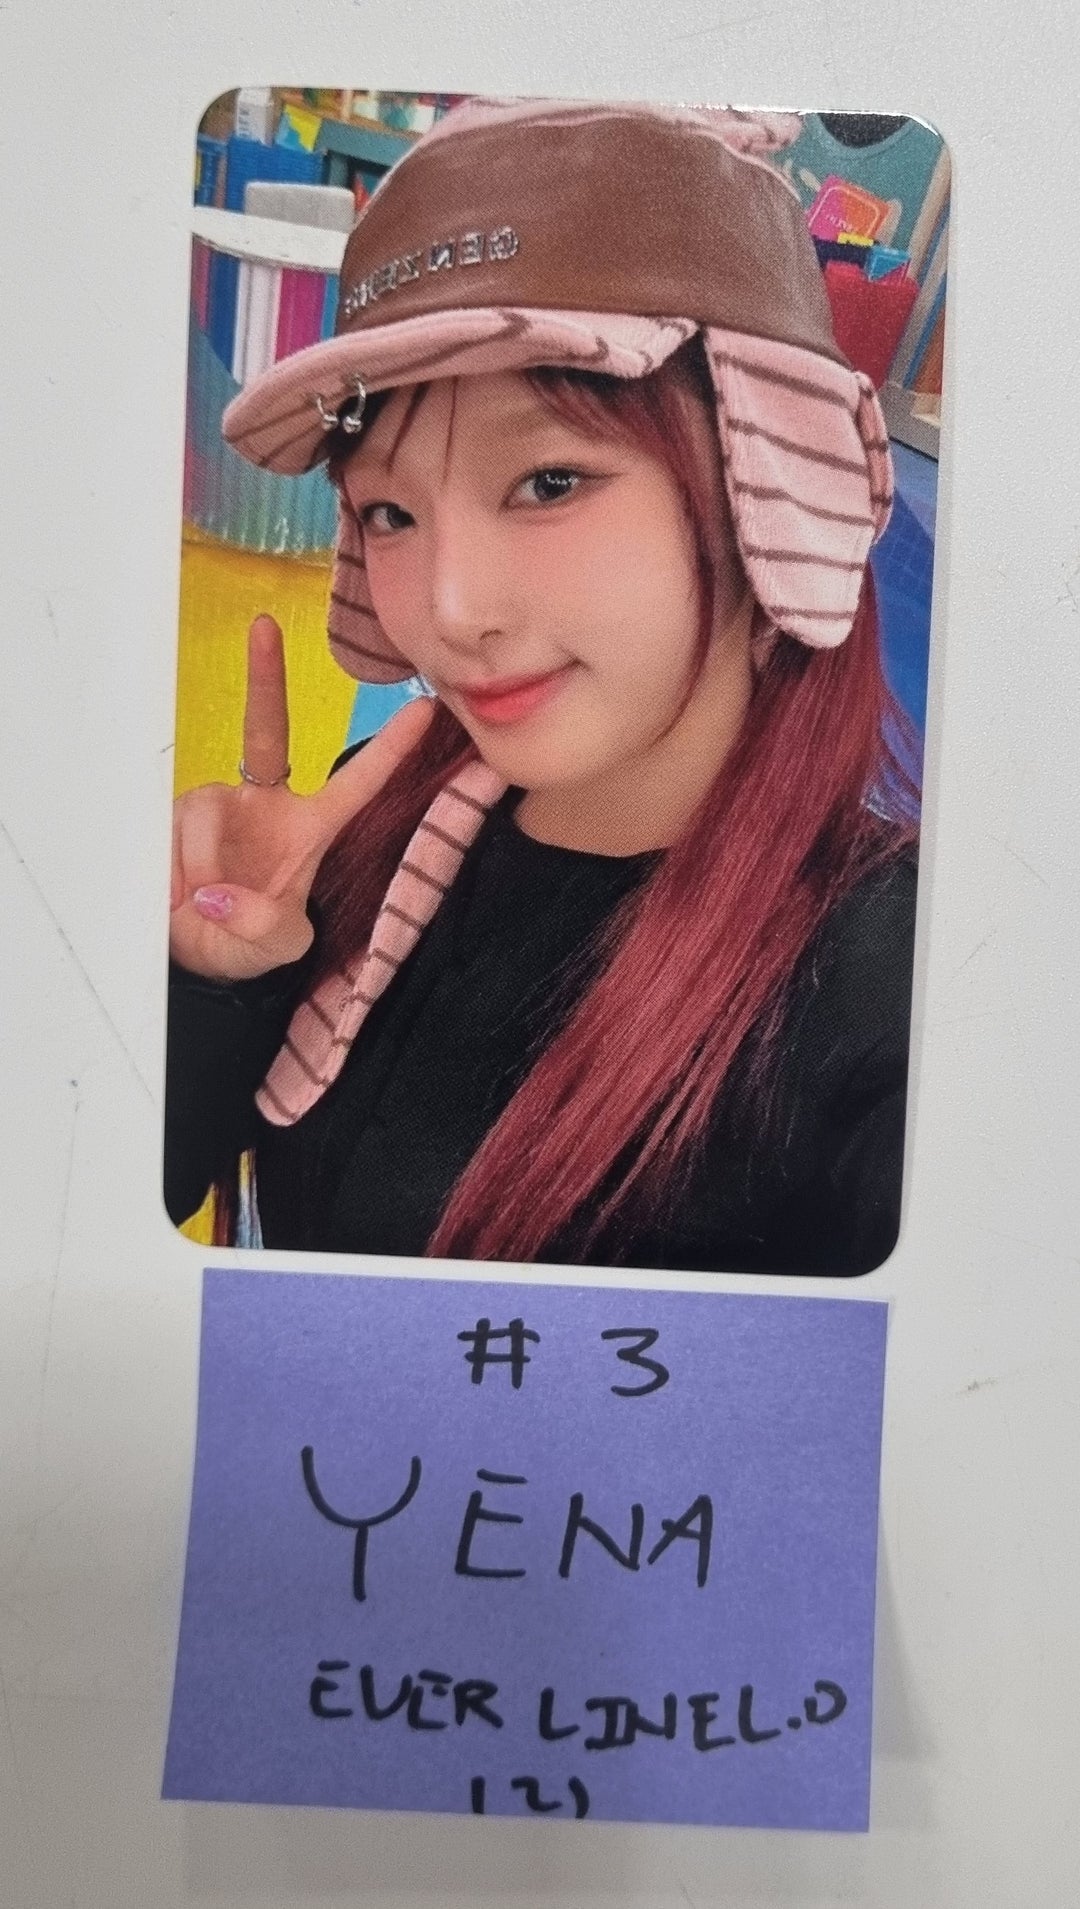 YENA "Good Morning" - Everline Lucky Draw Event Photocard [24.3.13]